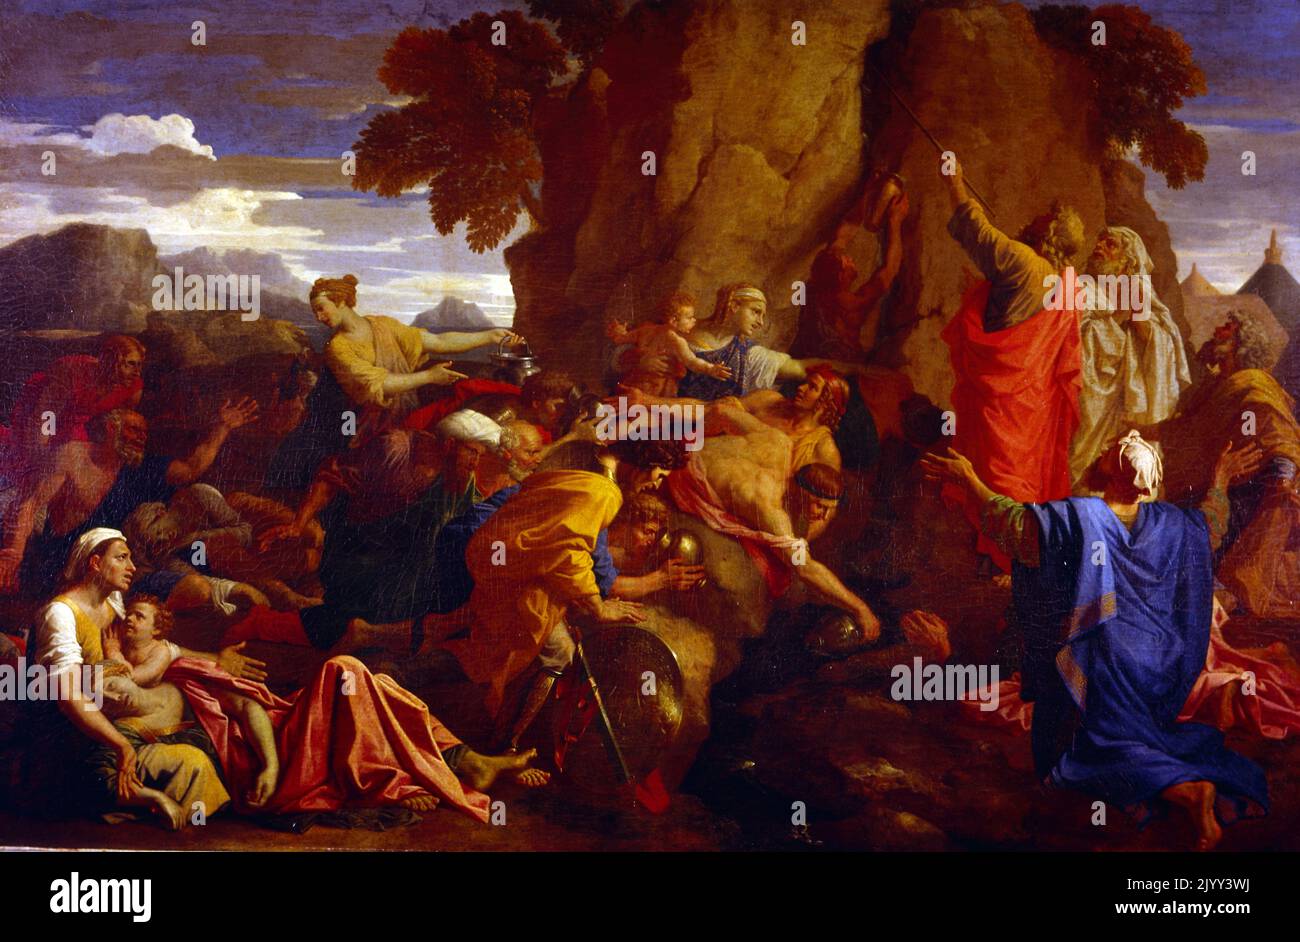 Moses Striking the Rock; 1649. By Nicolas Poussin, Oil on canvas. Nicolas Poussin (1594 - 1665), the leading painter of the classical French Baroque style. He painted this work for his friend Jacques Stell. Stock Photo